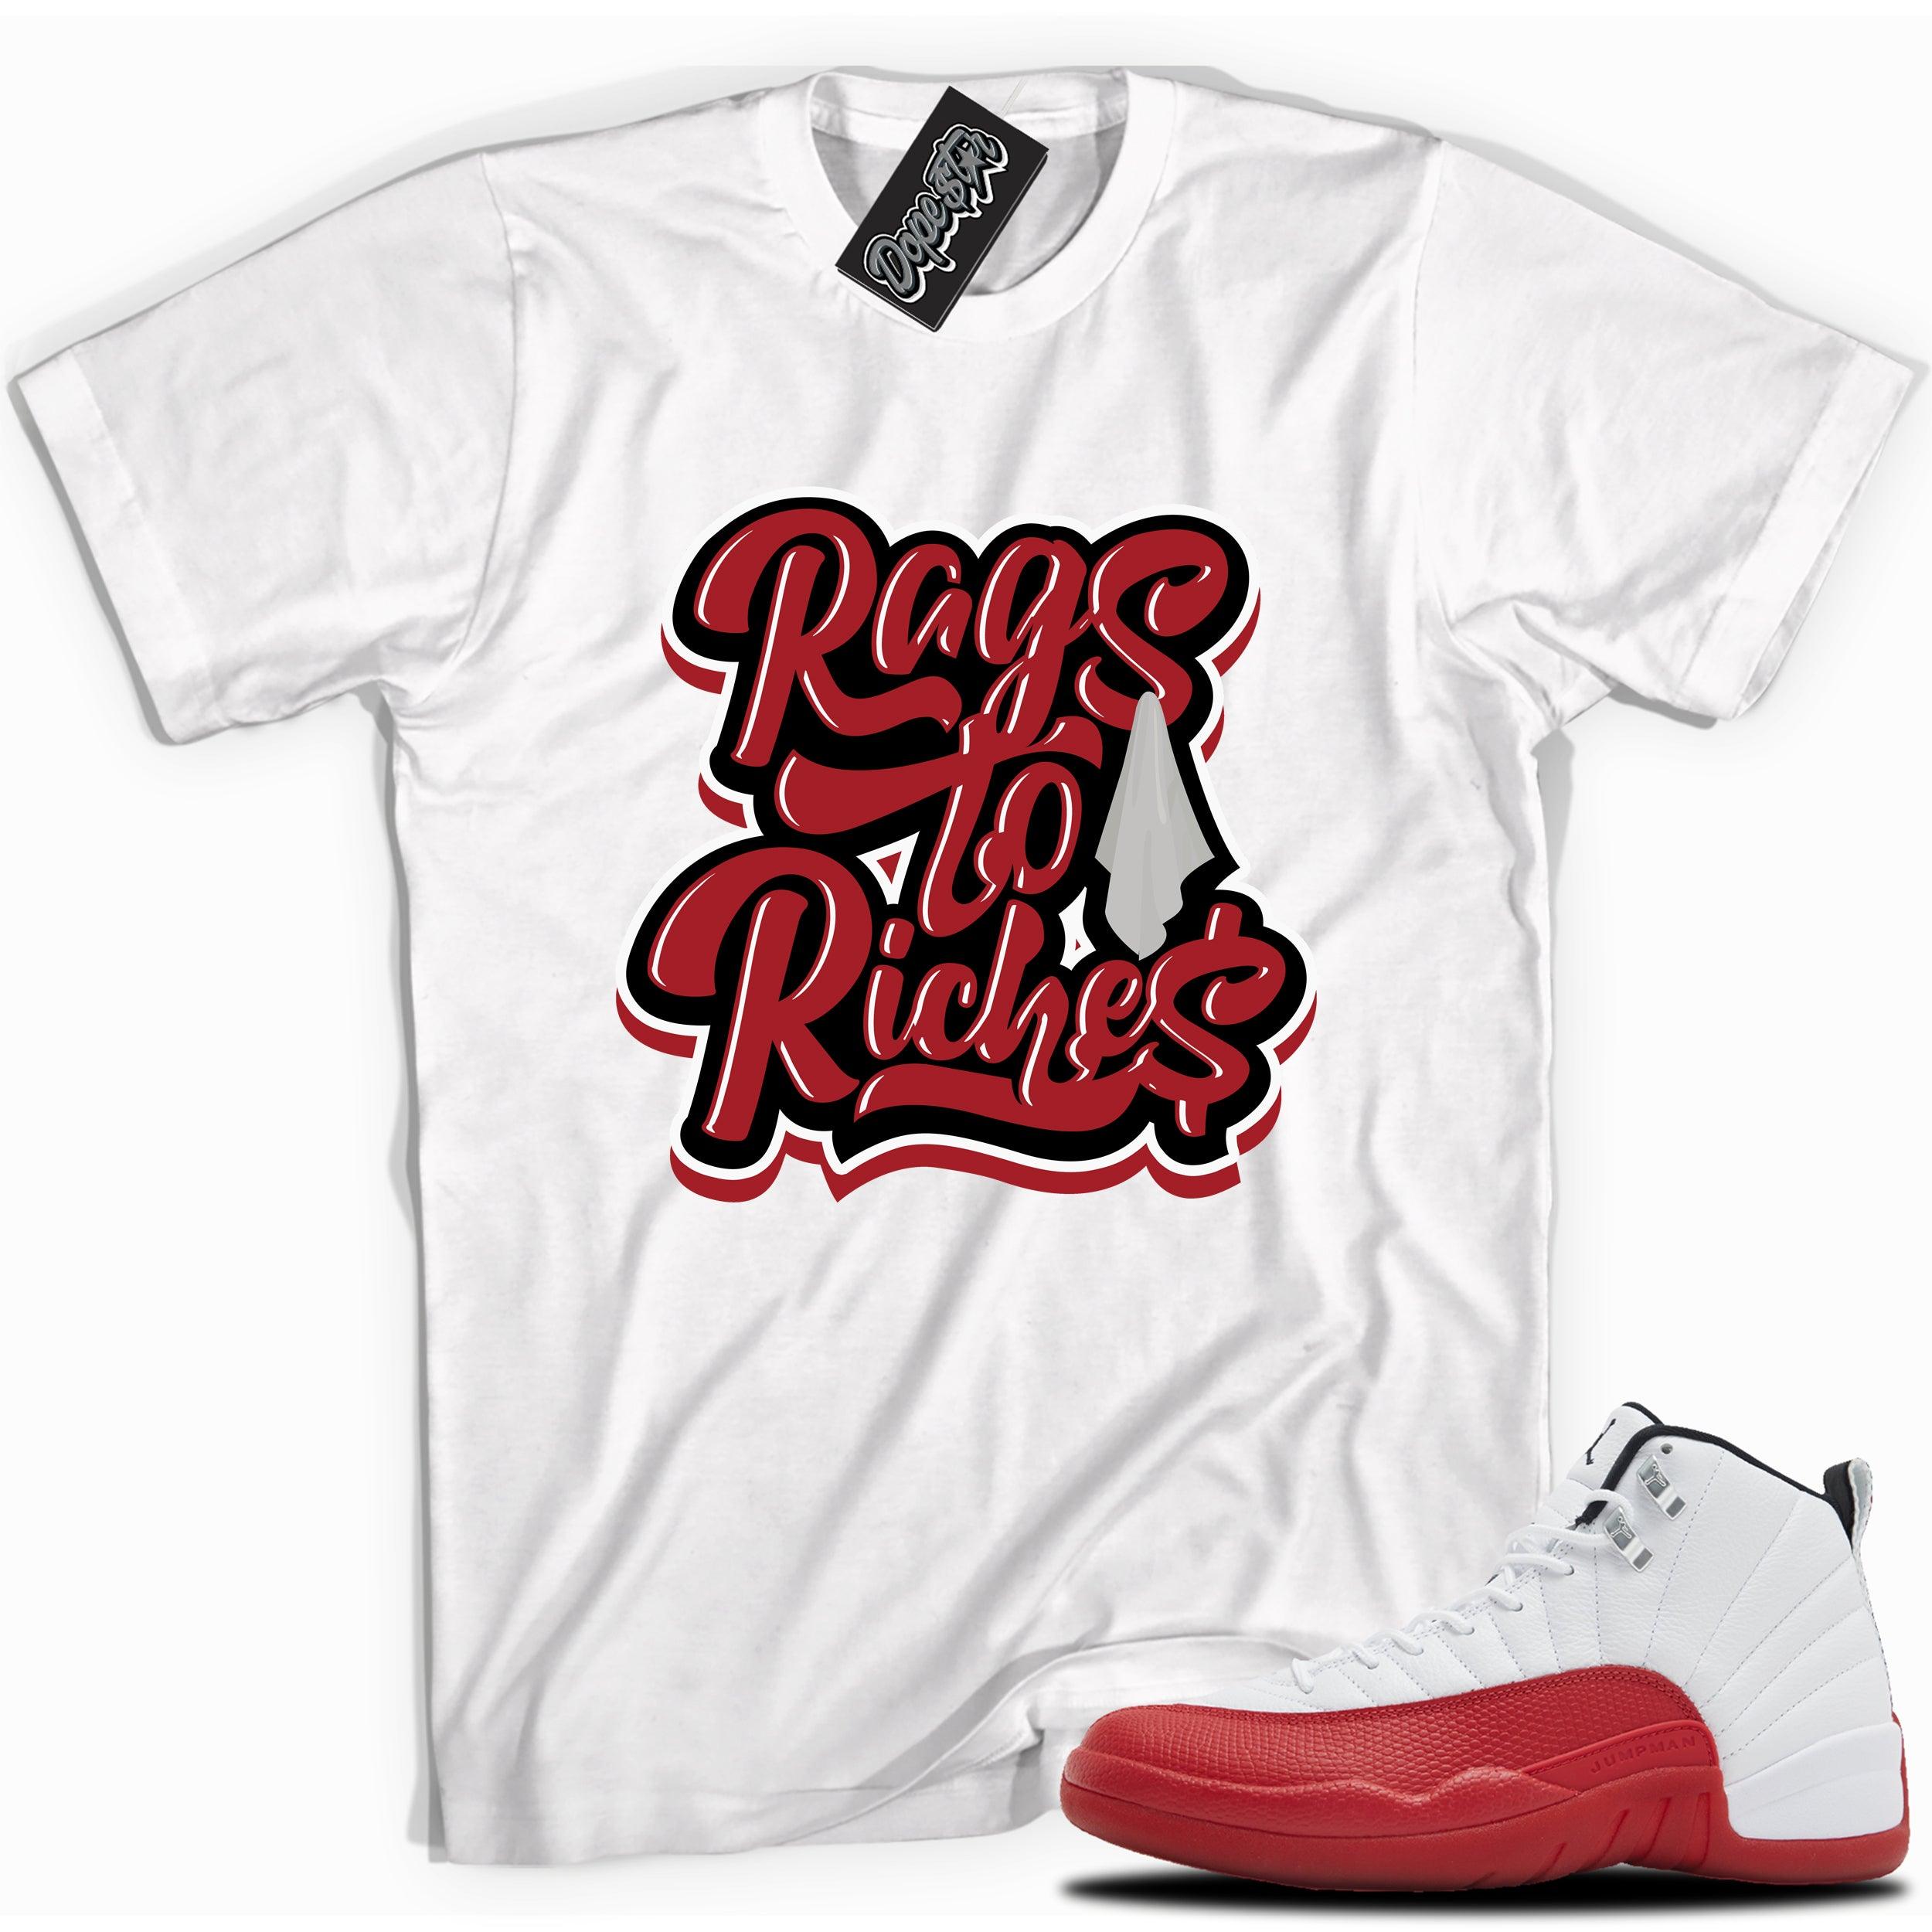 Cool White graphic tee with “Rags To Riches” print, that perfectly matches Air Jordan 12 Retro Cherry Red 2023 red and white sneakers